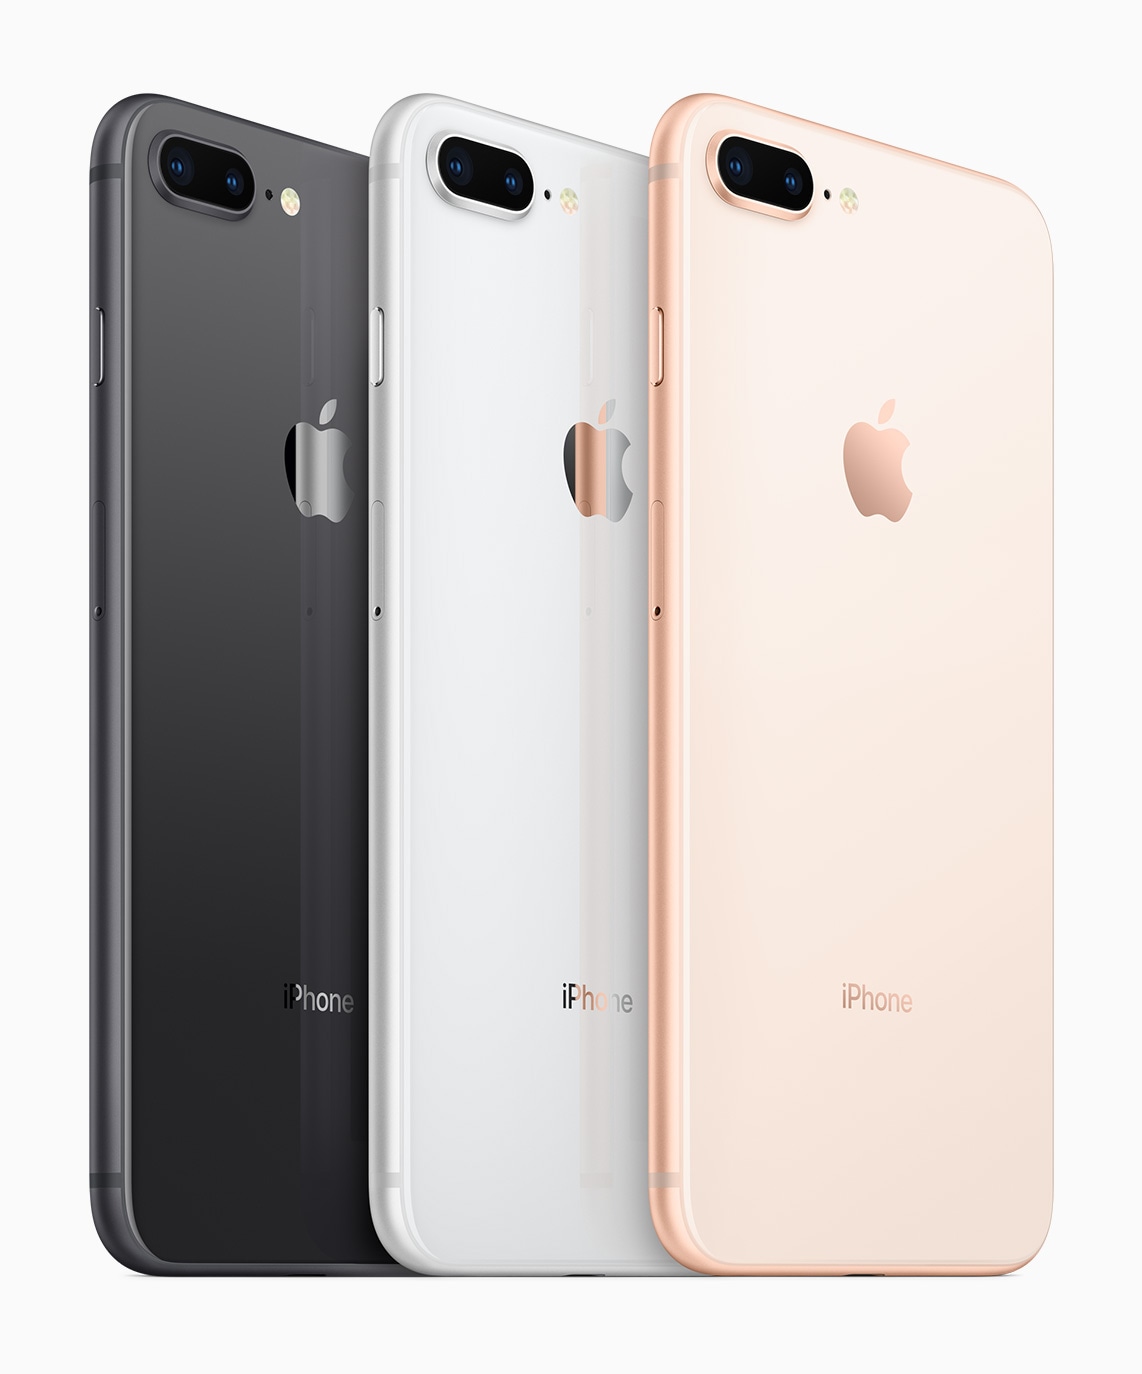 Special Event: Here are the new 8/8 Plus iPhones with new glass design and wireless charging